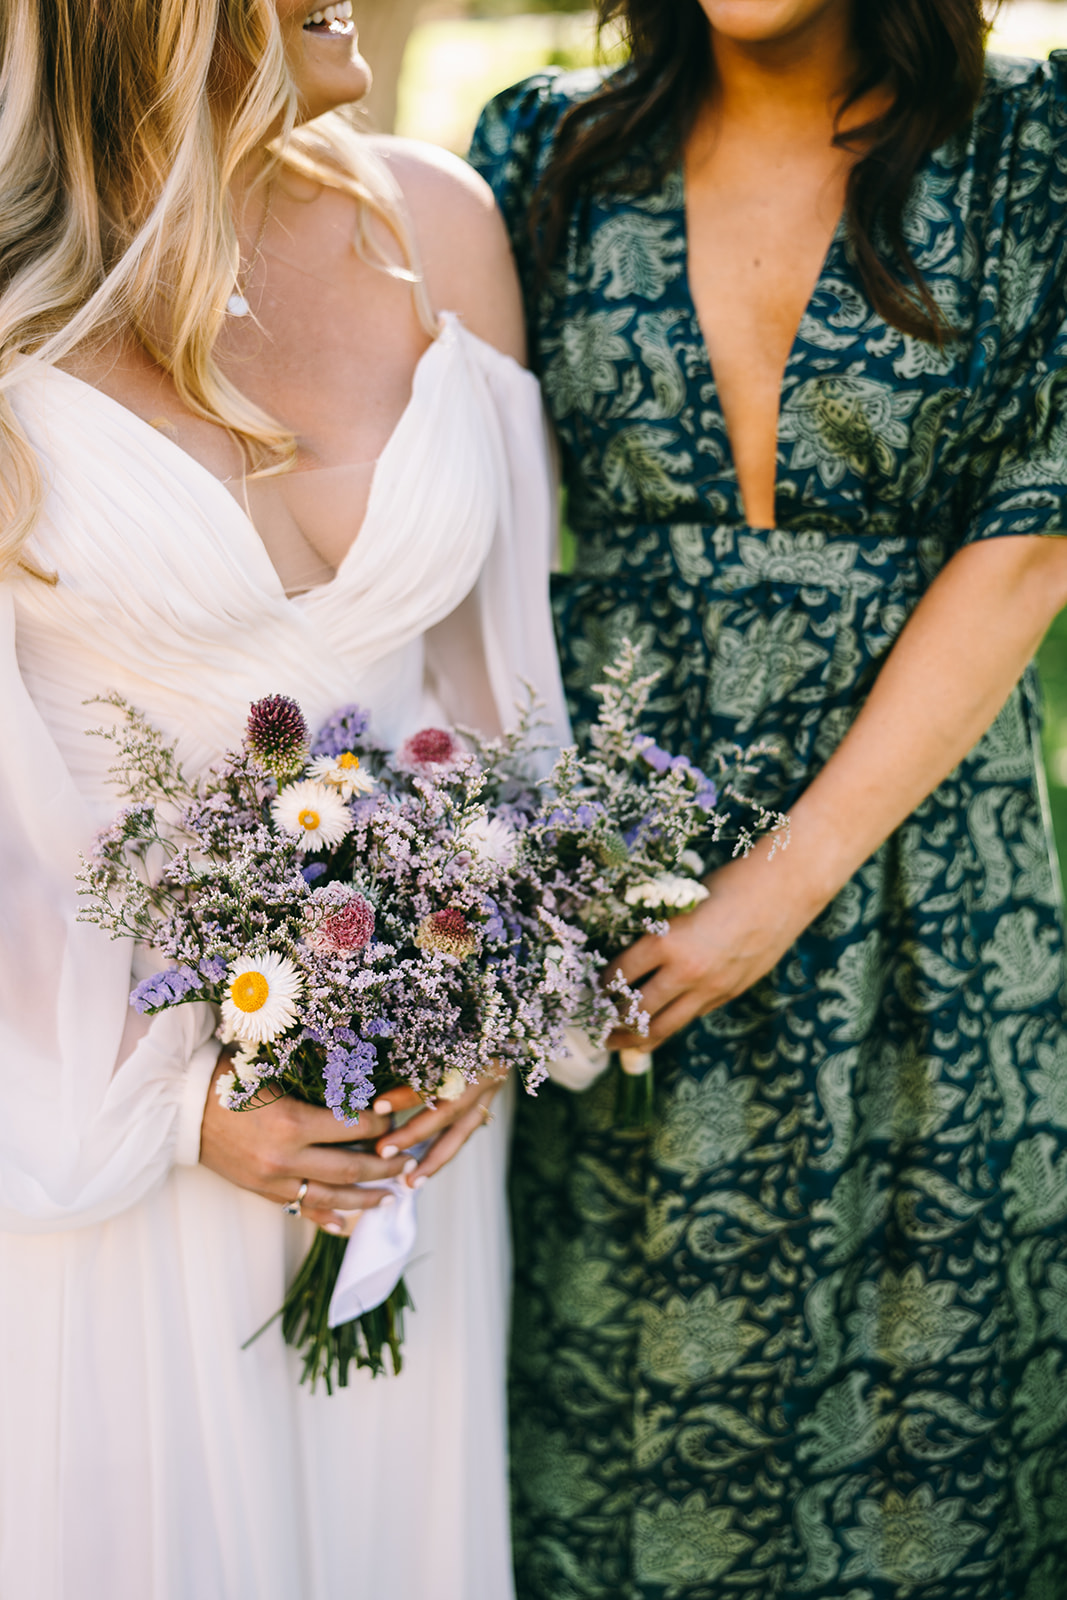 Bride holding purple and white flowers standing next eo a woman in green and blue dress